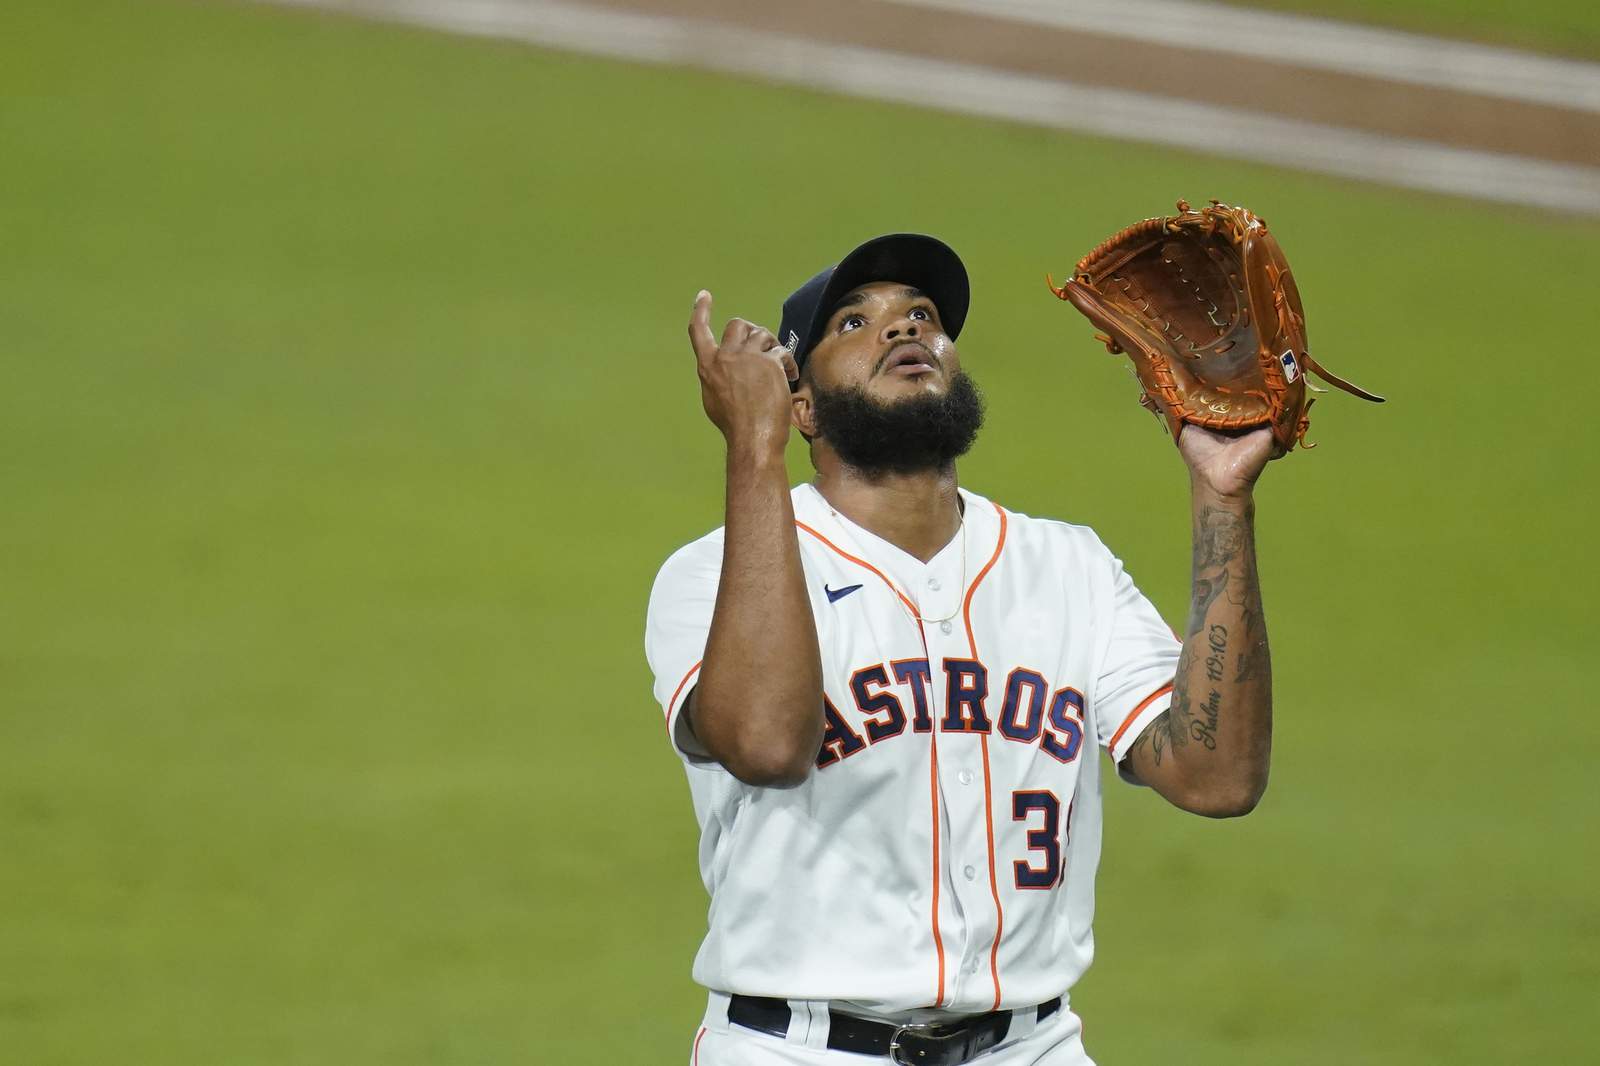 Astros pitcher Josh James has hip surgery; out 6 to 8 months